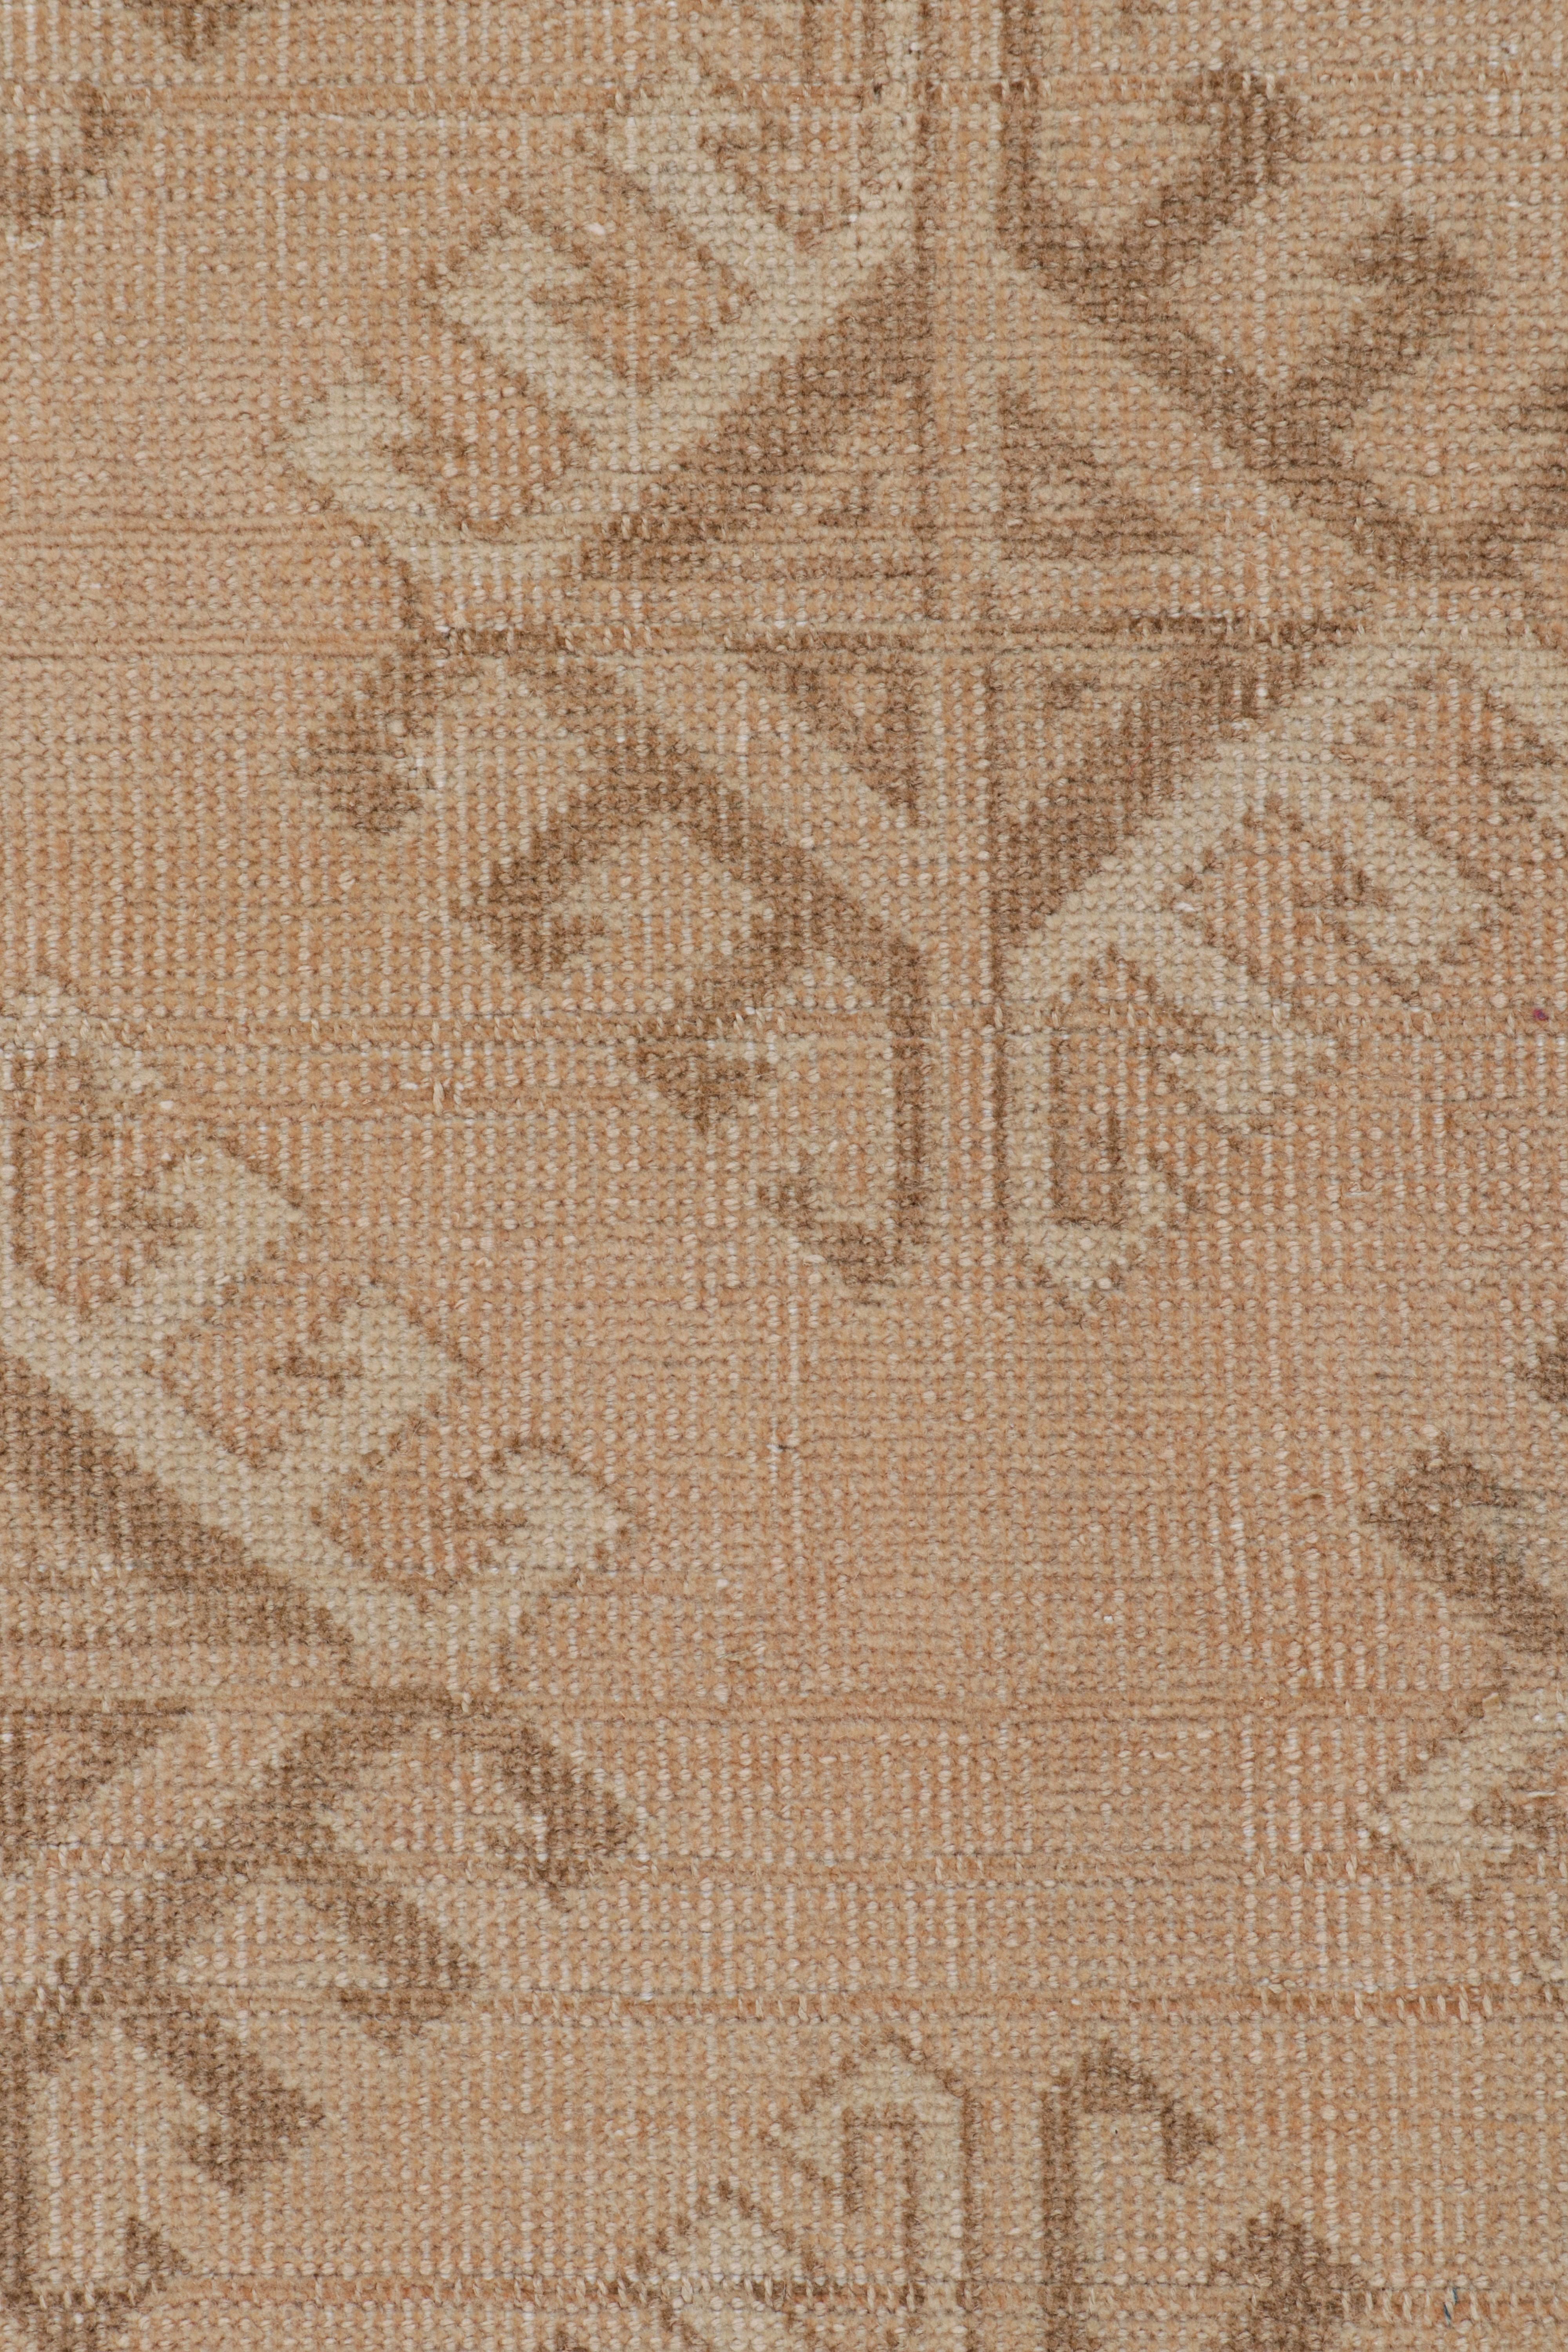 Vintage Ersari Rug in Pink with Beige-Brown Geometric Patterns, from Rug & Kilim In Good Condition For Sale In Long Island City, NY